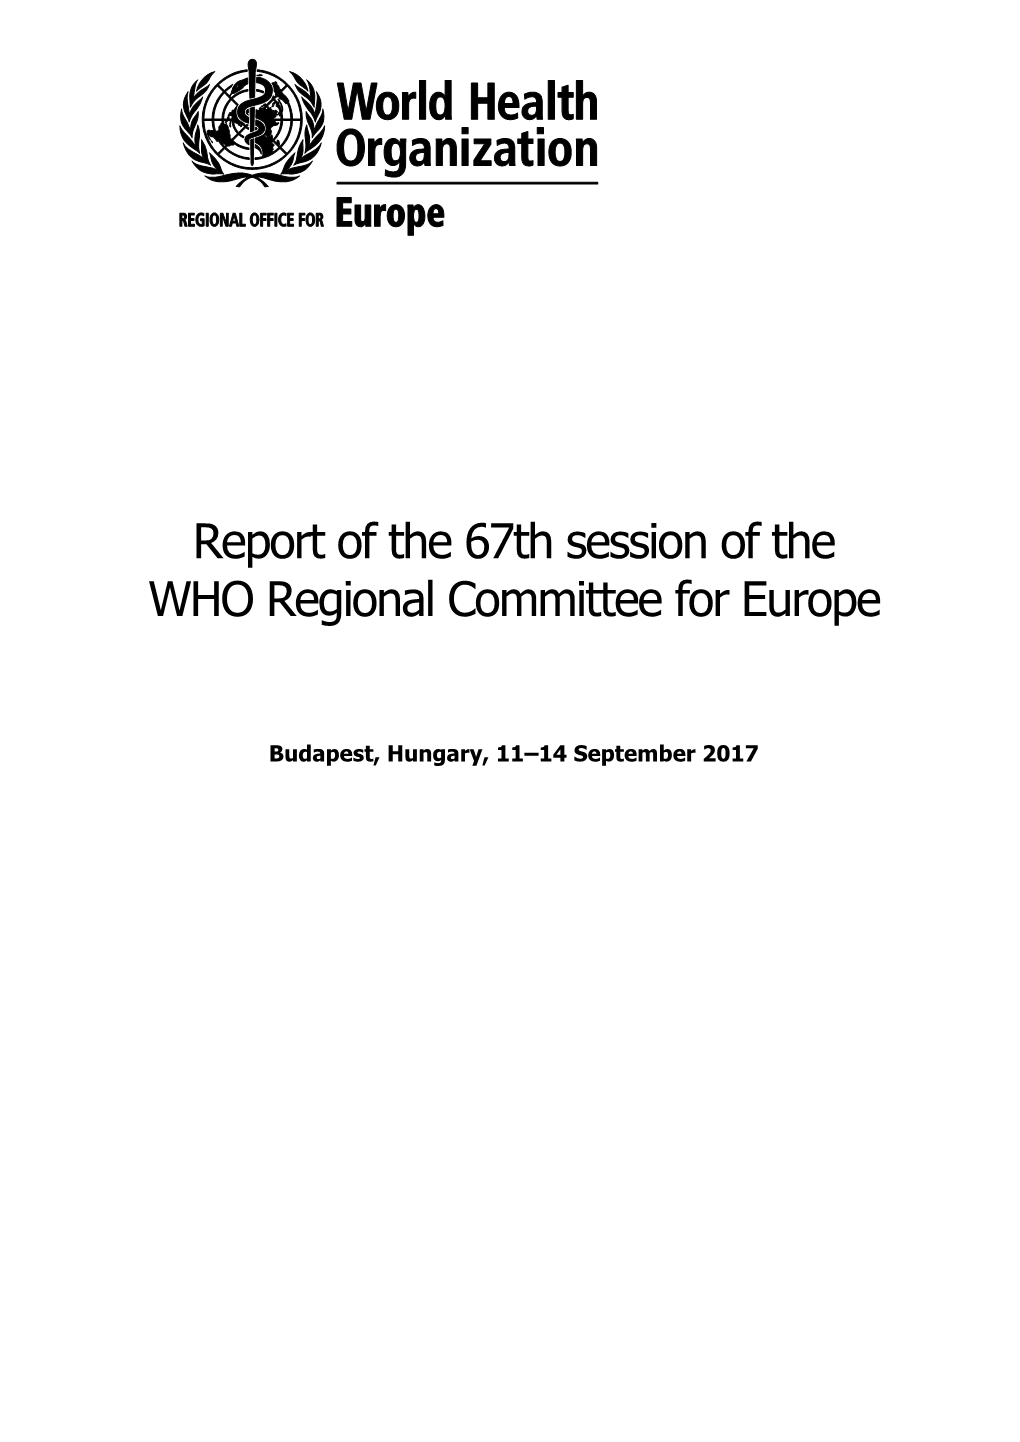 Report of the 67Th Session of the WHO Regional Committee for Europe